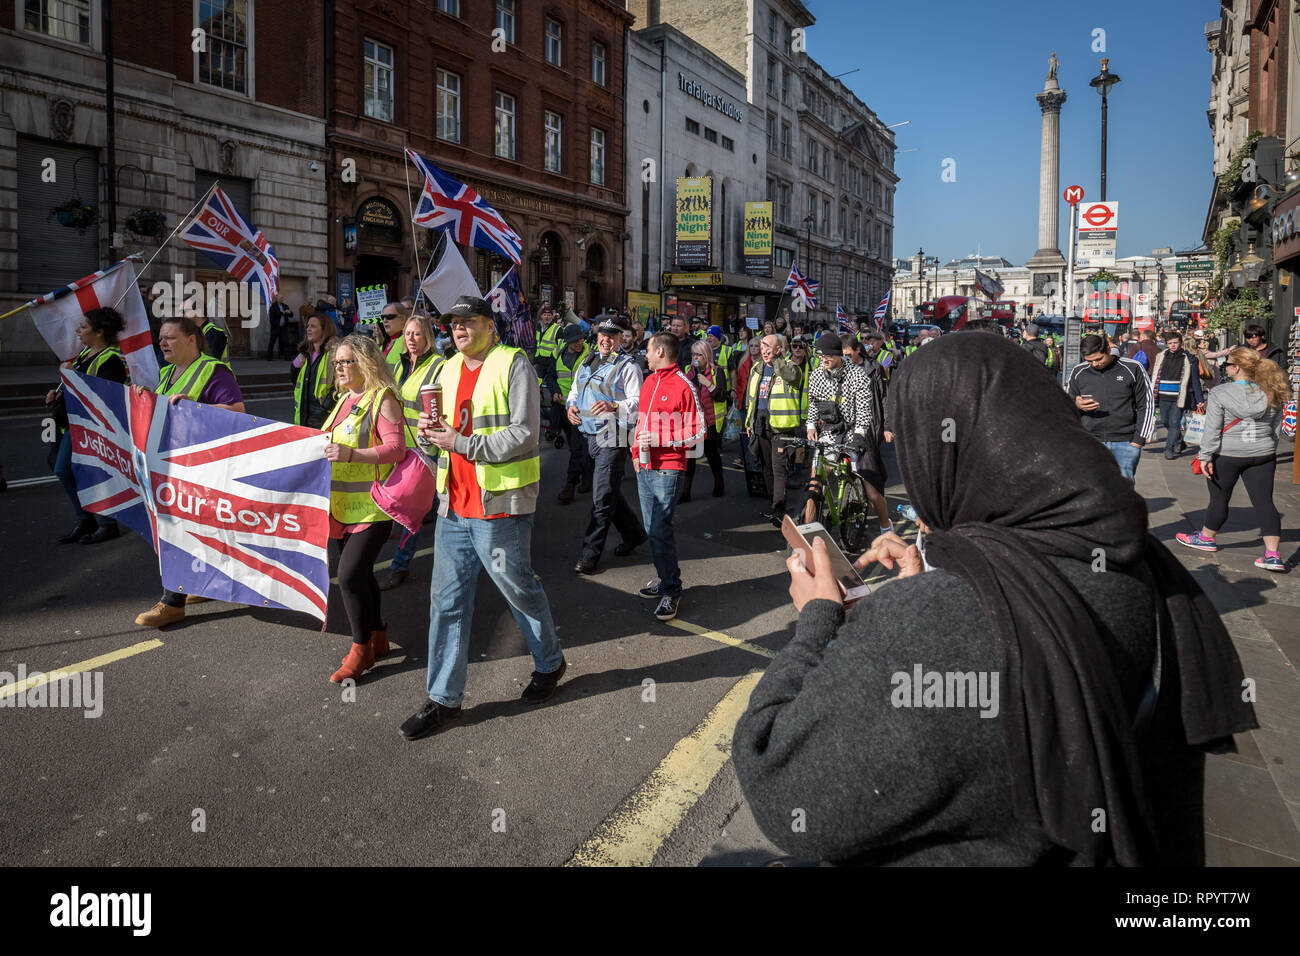 London, UK. 23rd February, 2019. A muslim woman checks her phone as the protesters march down Whitehall. Pro-Brexit protesters calling themselves the 'Yellow Vests UK' movement block roads and traffic whilst protest marching through Westminster. The right-wing nationalists briefly clashed with police and angry drivers whilst aggressively demanding Britain leave the EU without an exit deal. Credit: Guy Corbishley/Alamy Live News Stock Photo